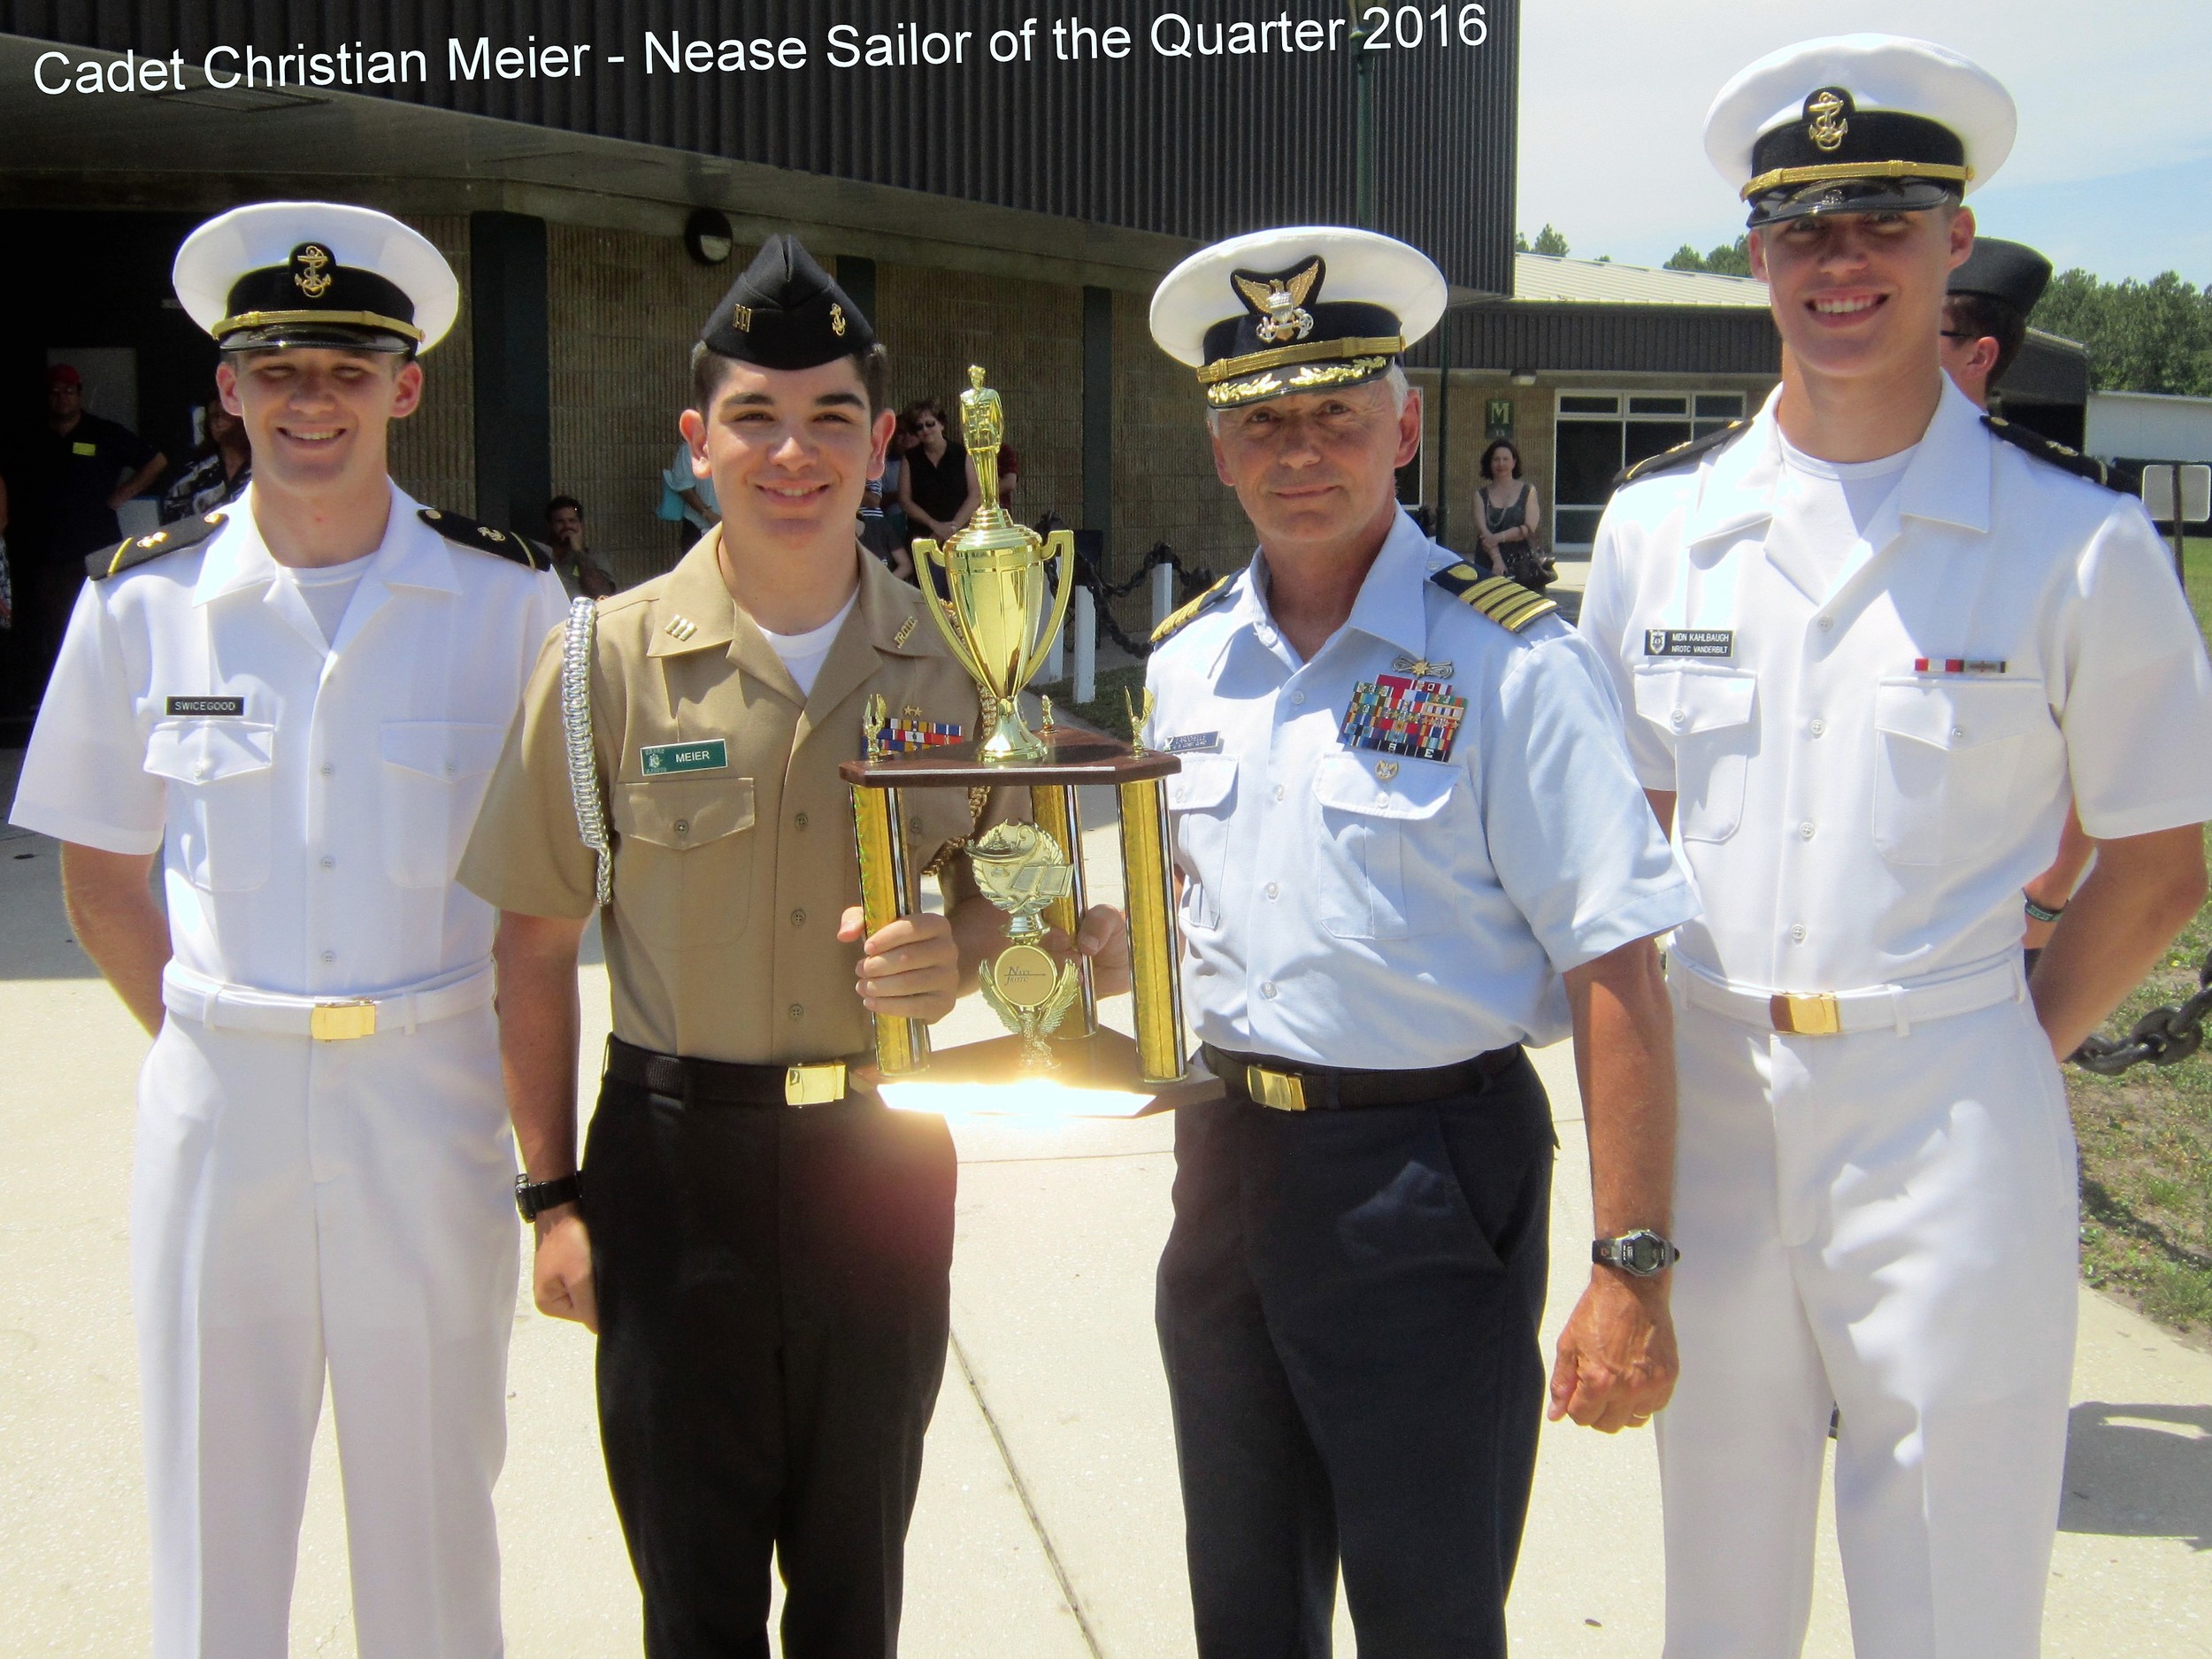 Christian Meier receives the Sailor of the Quarter Award from Nease High School’s nationally ranked NJROTC program. He hoped to one day become a Navy pilot.